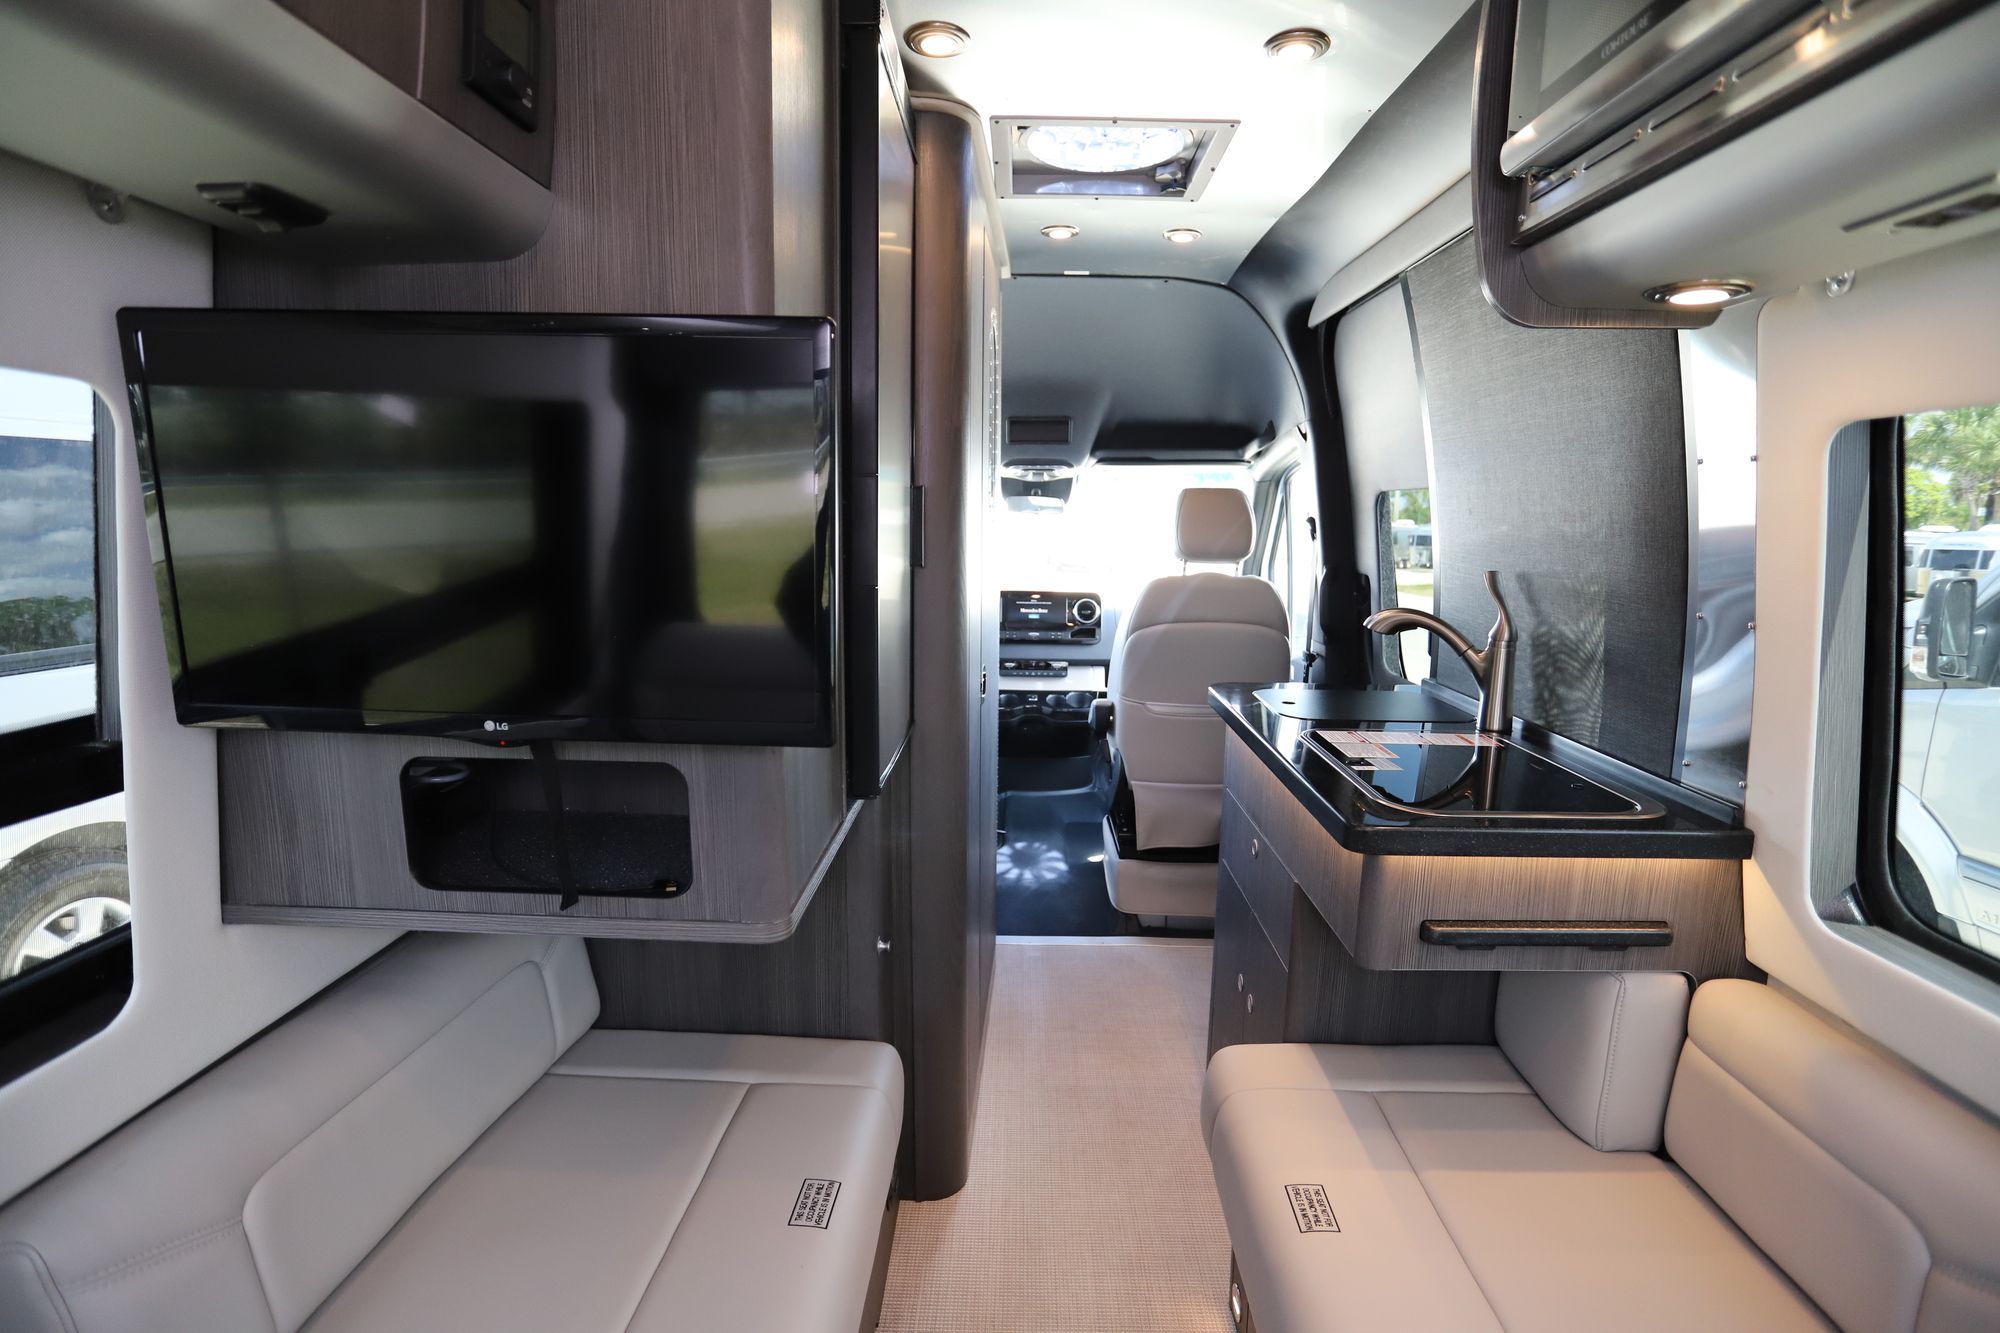 New 2020 Airstream Interstate 19-2500 Class B  For Sale